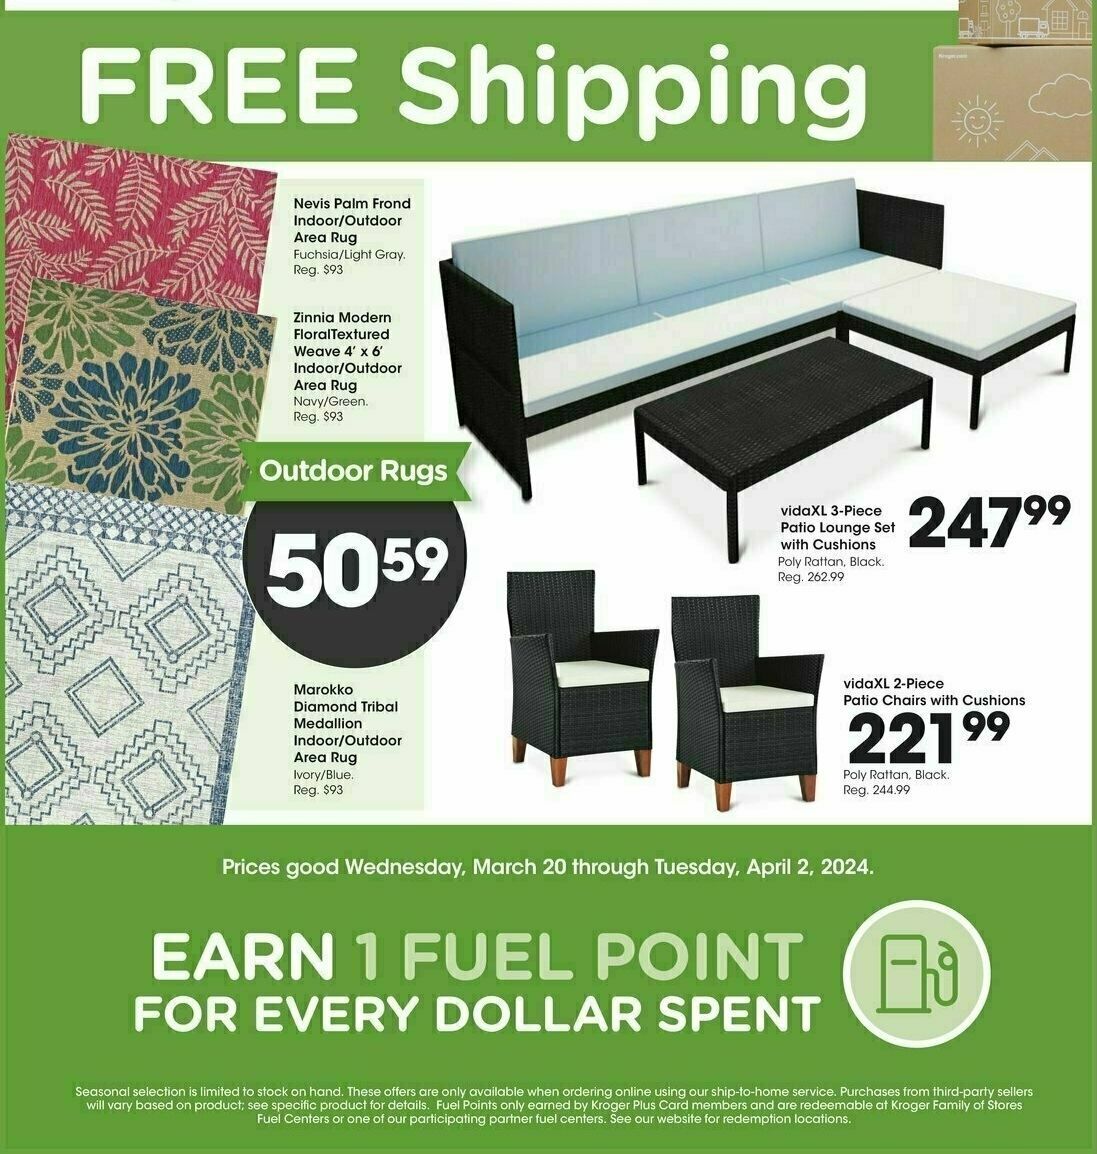 Food 4 Less Ship to Home Weekly Ad from March 20